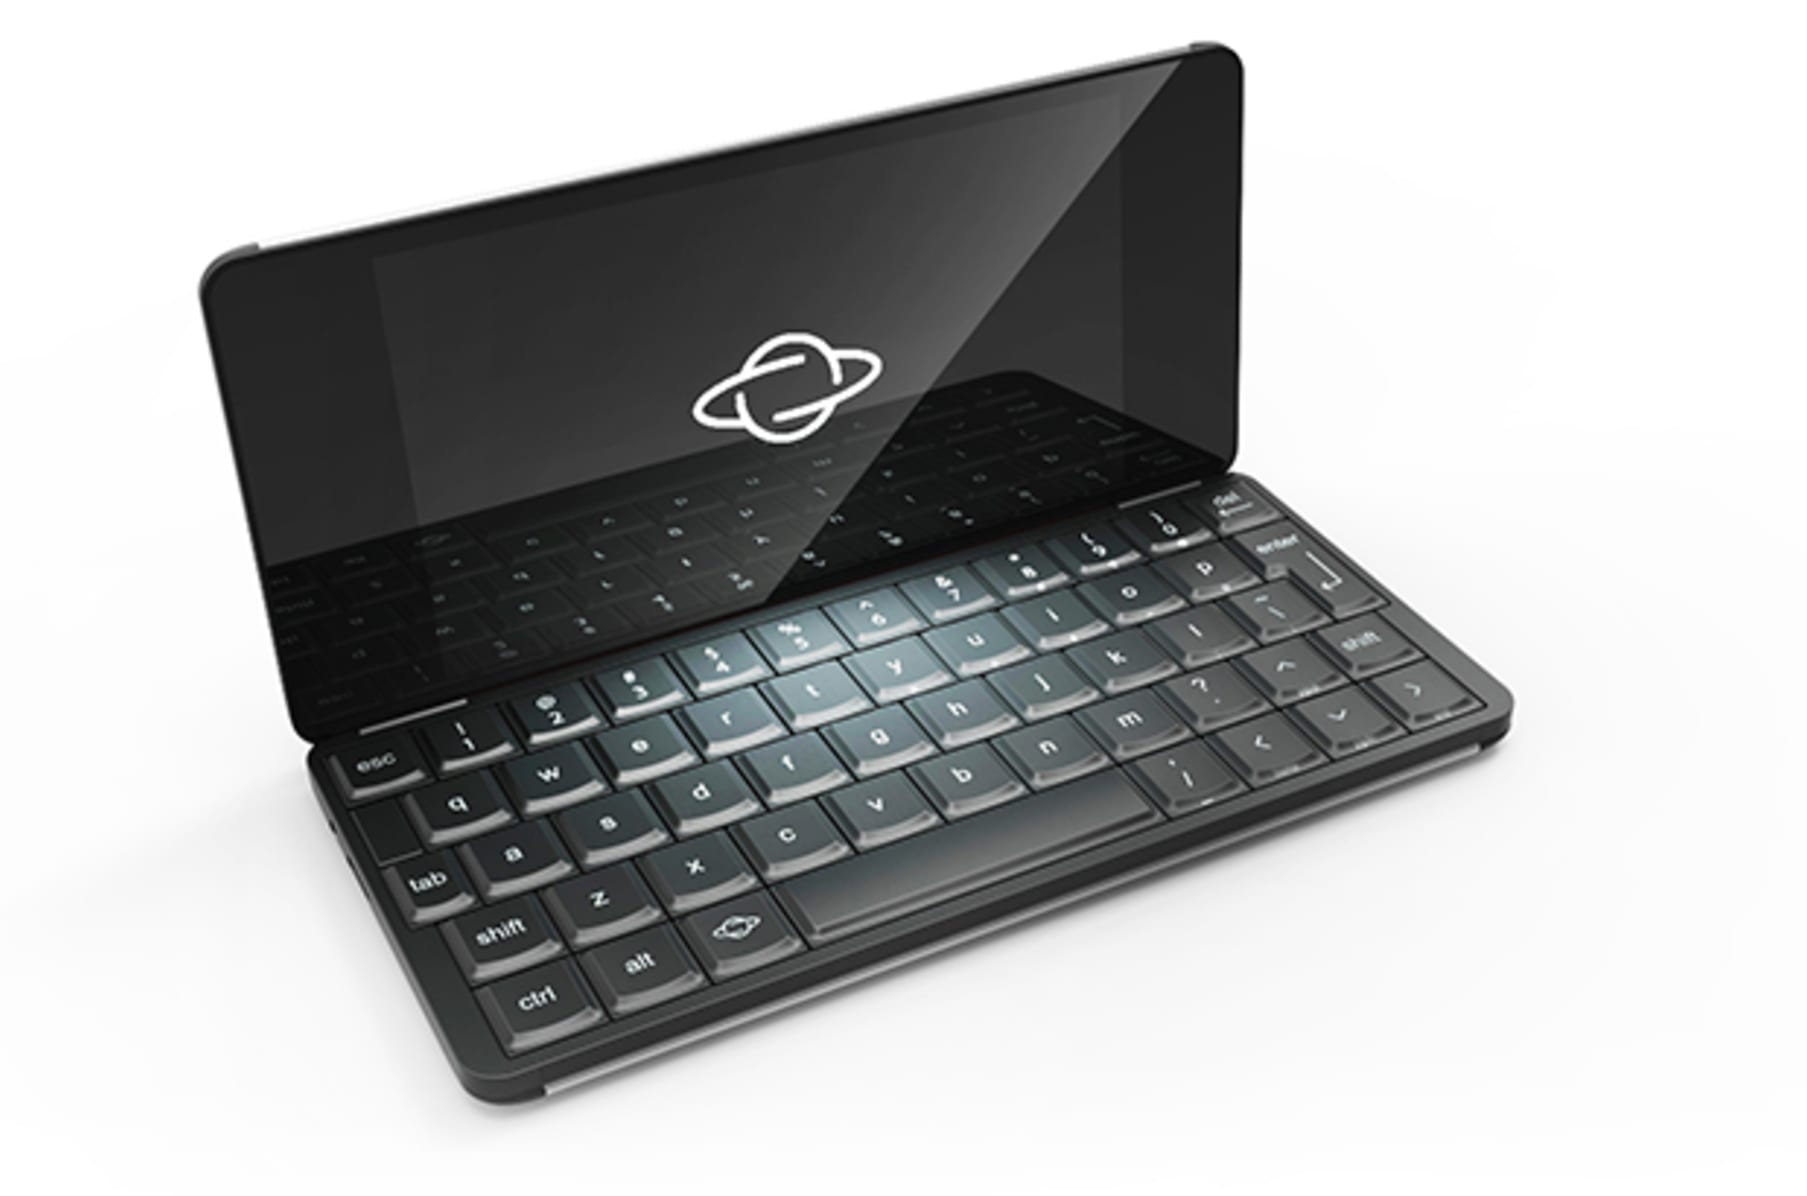 Gemini Pda Android Linux Keyboard Mobile Device Indiegogo